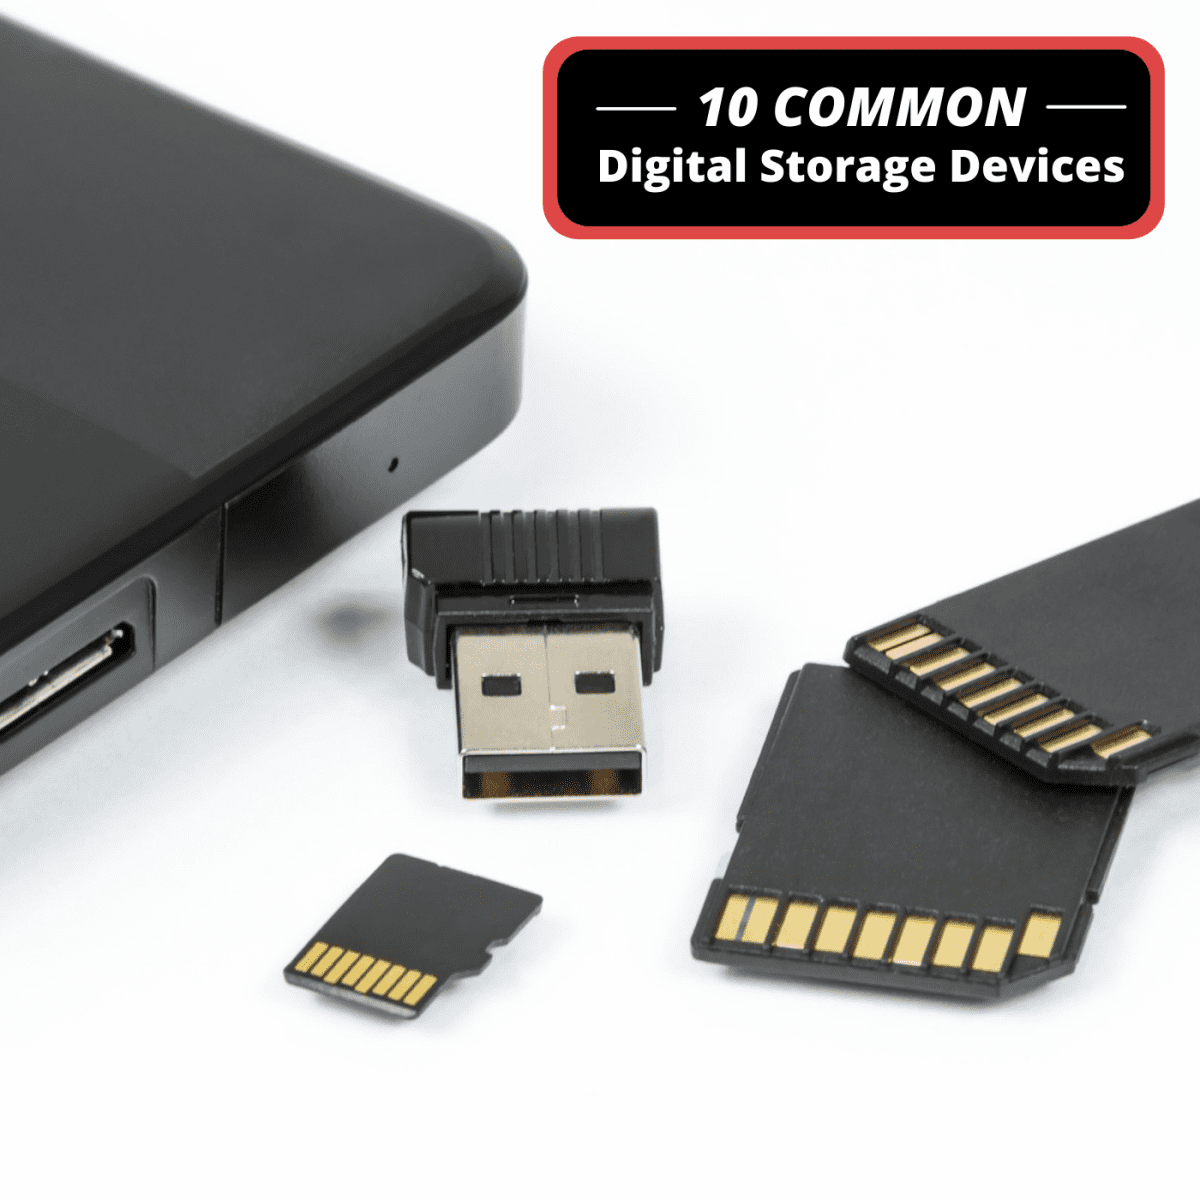 Computer Basics: 28 Examples of Storage Devices for Digital Data